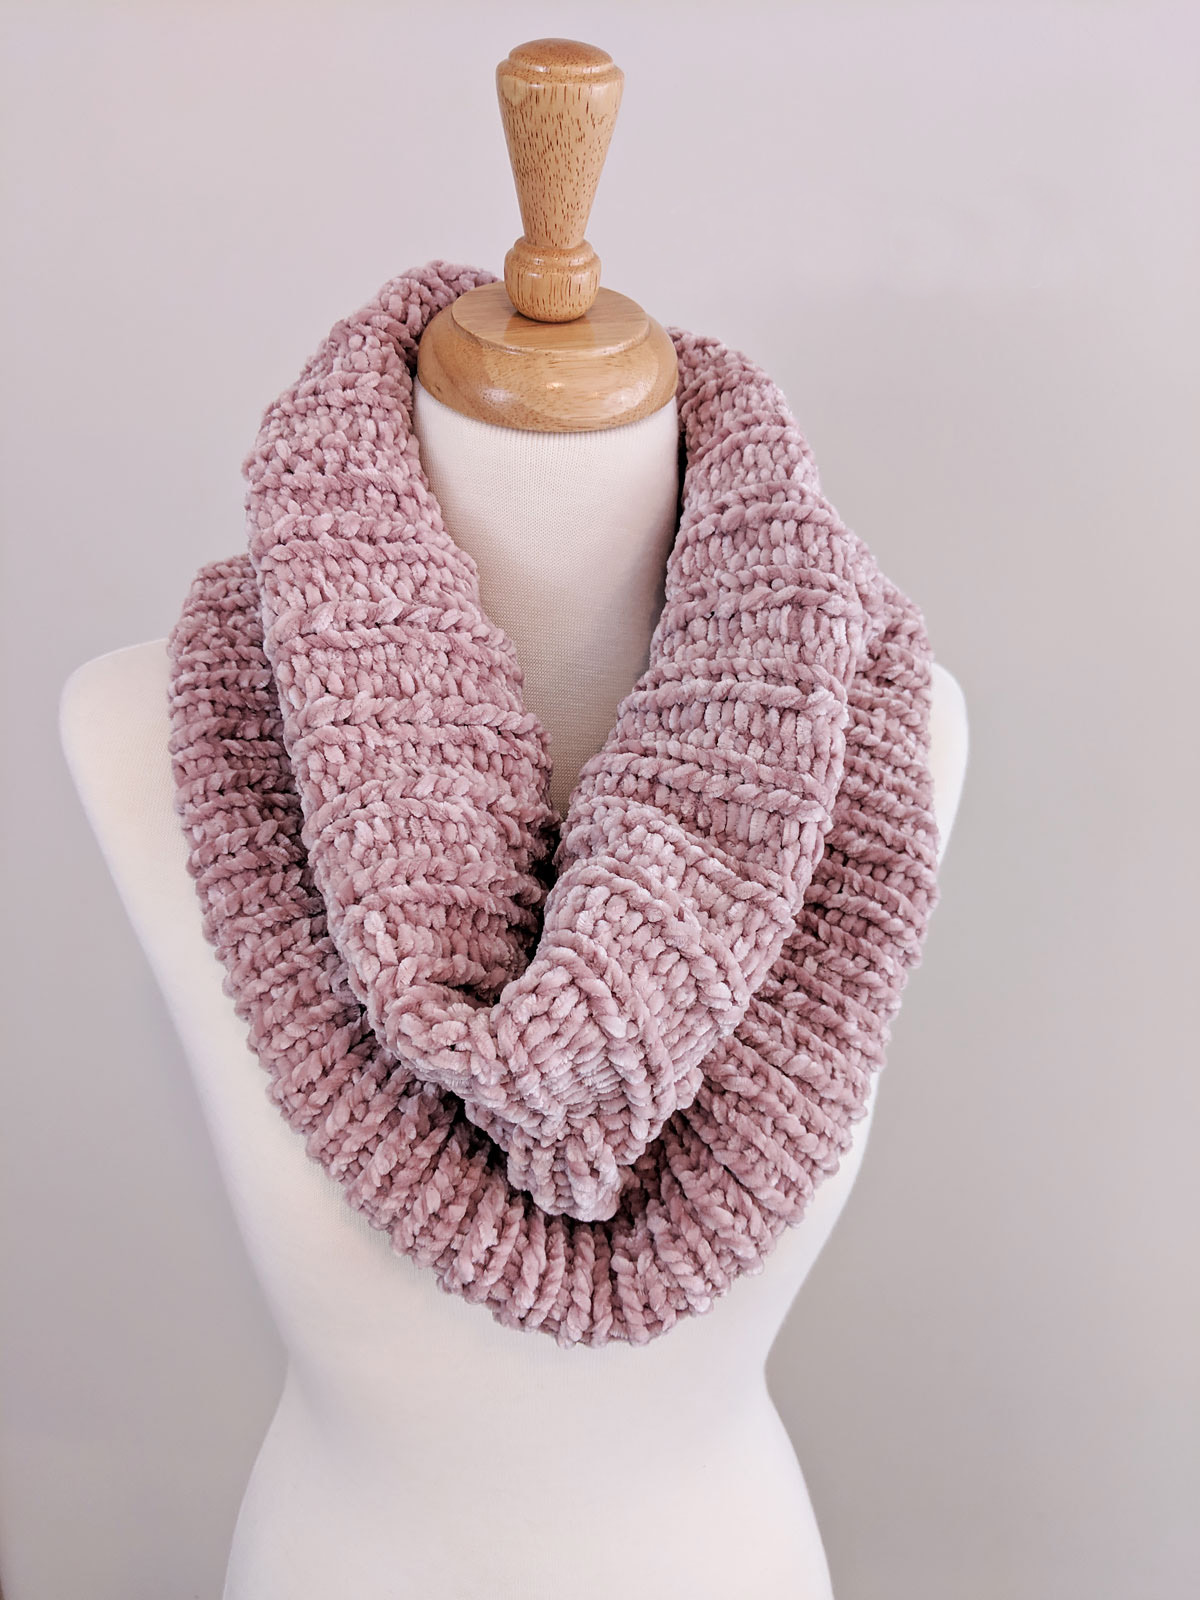 18 Cowl Knitting Patterns to Keep You Warm and Cozy ...